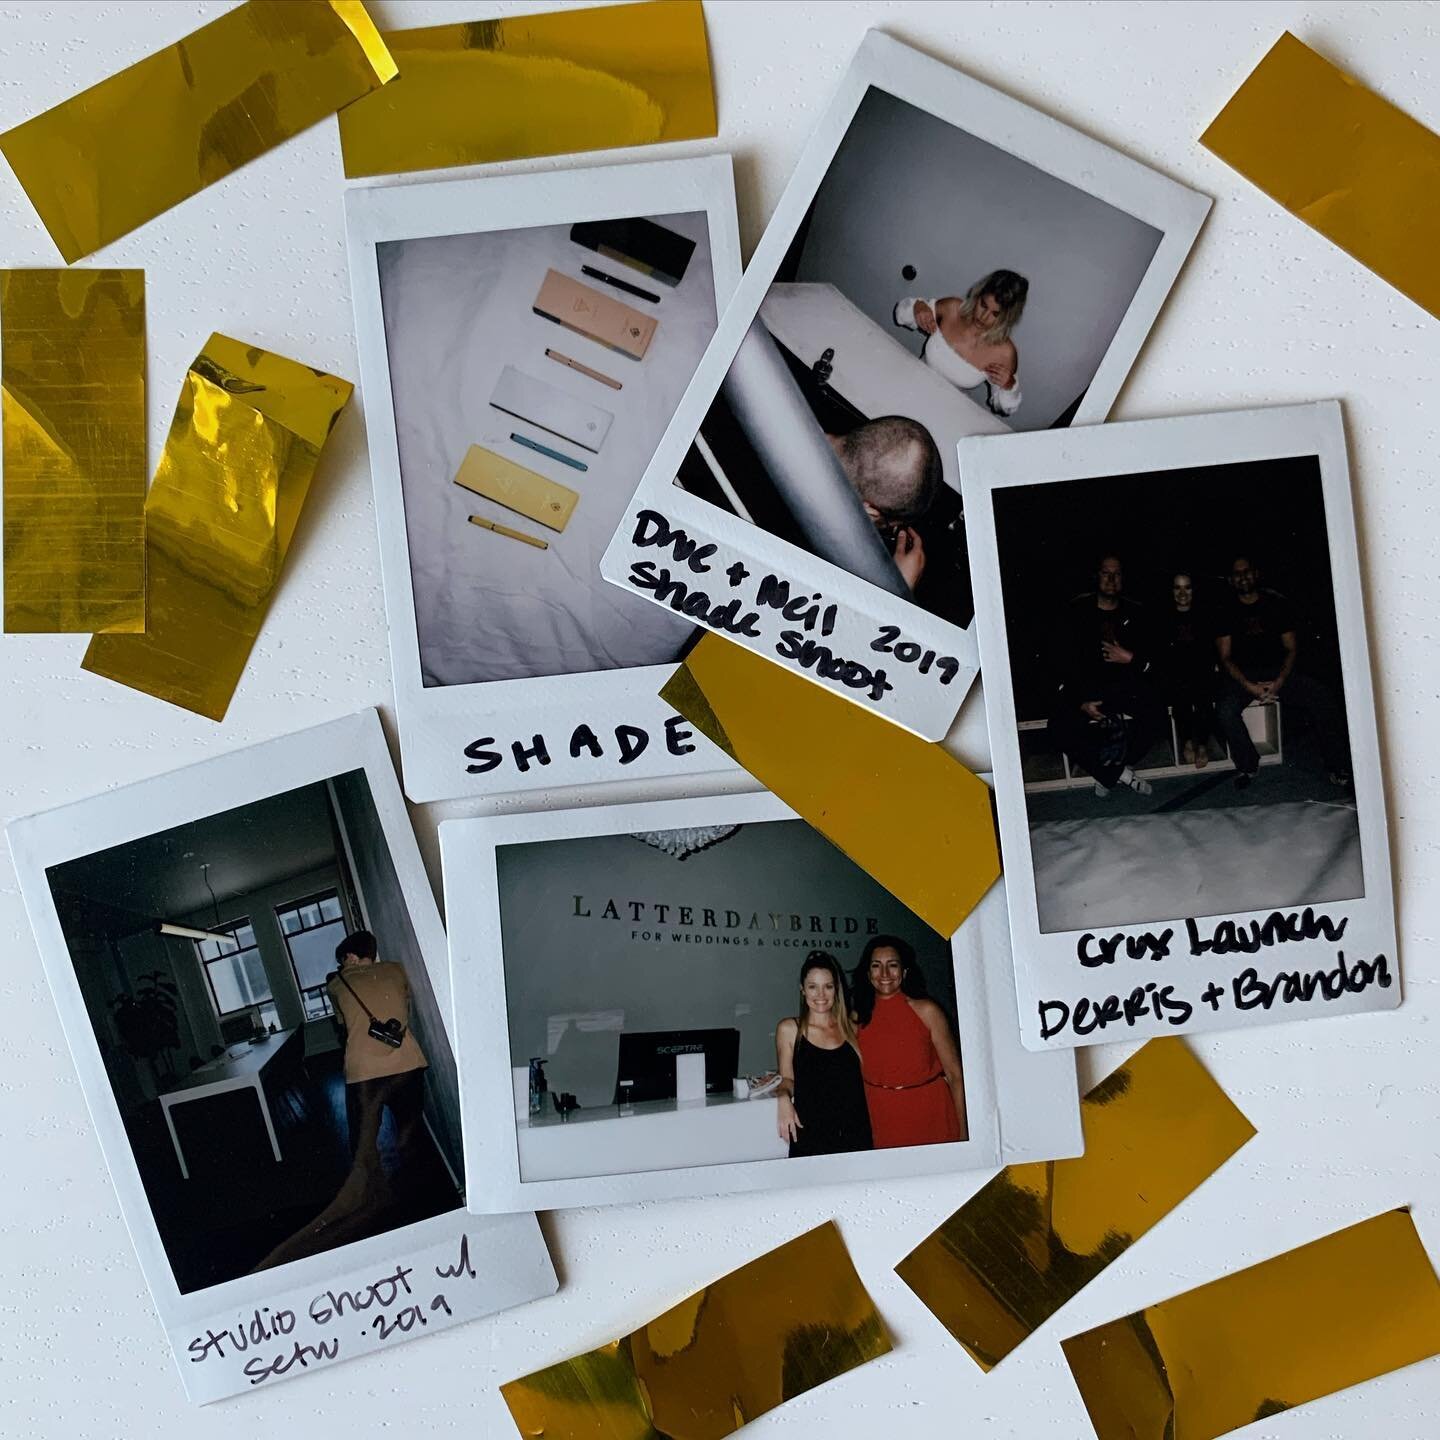 Looking back on some of the brand launches, creative projects, and photo shoots we&rsquo;ve done from Hong Kong to Los Angeles to Salt Lake City to New York to London to Ibiza 🌏🌎🌍

These polaroids are just a peek of what goes on behind the scenes 